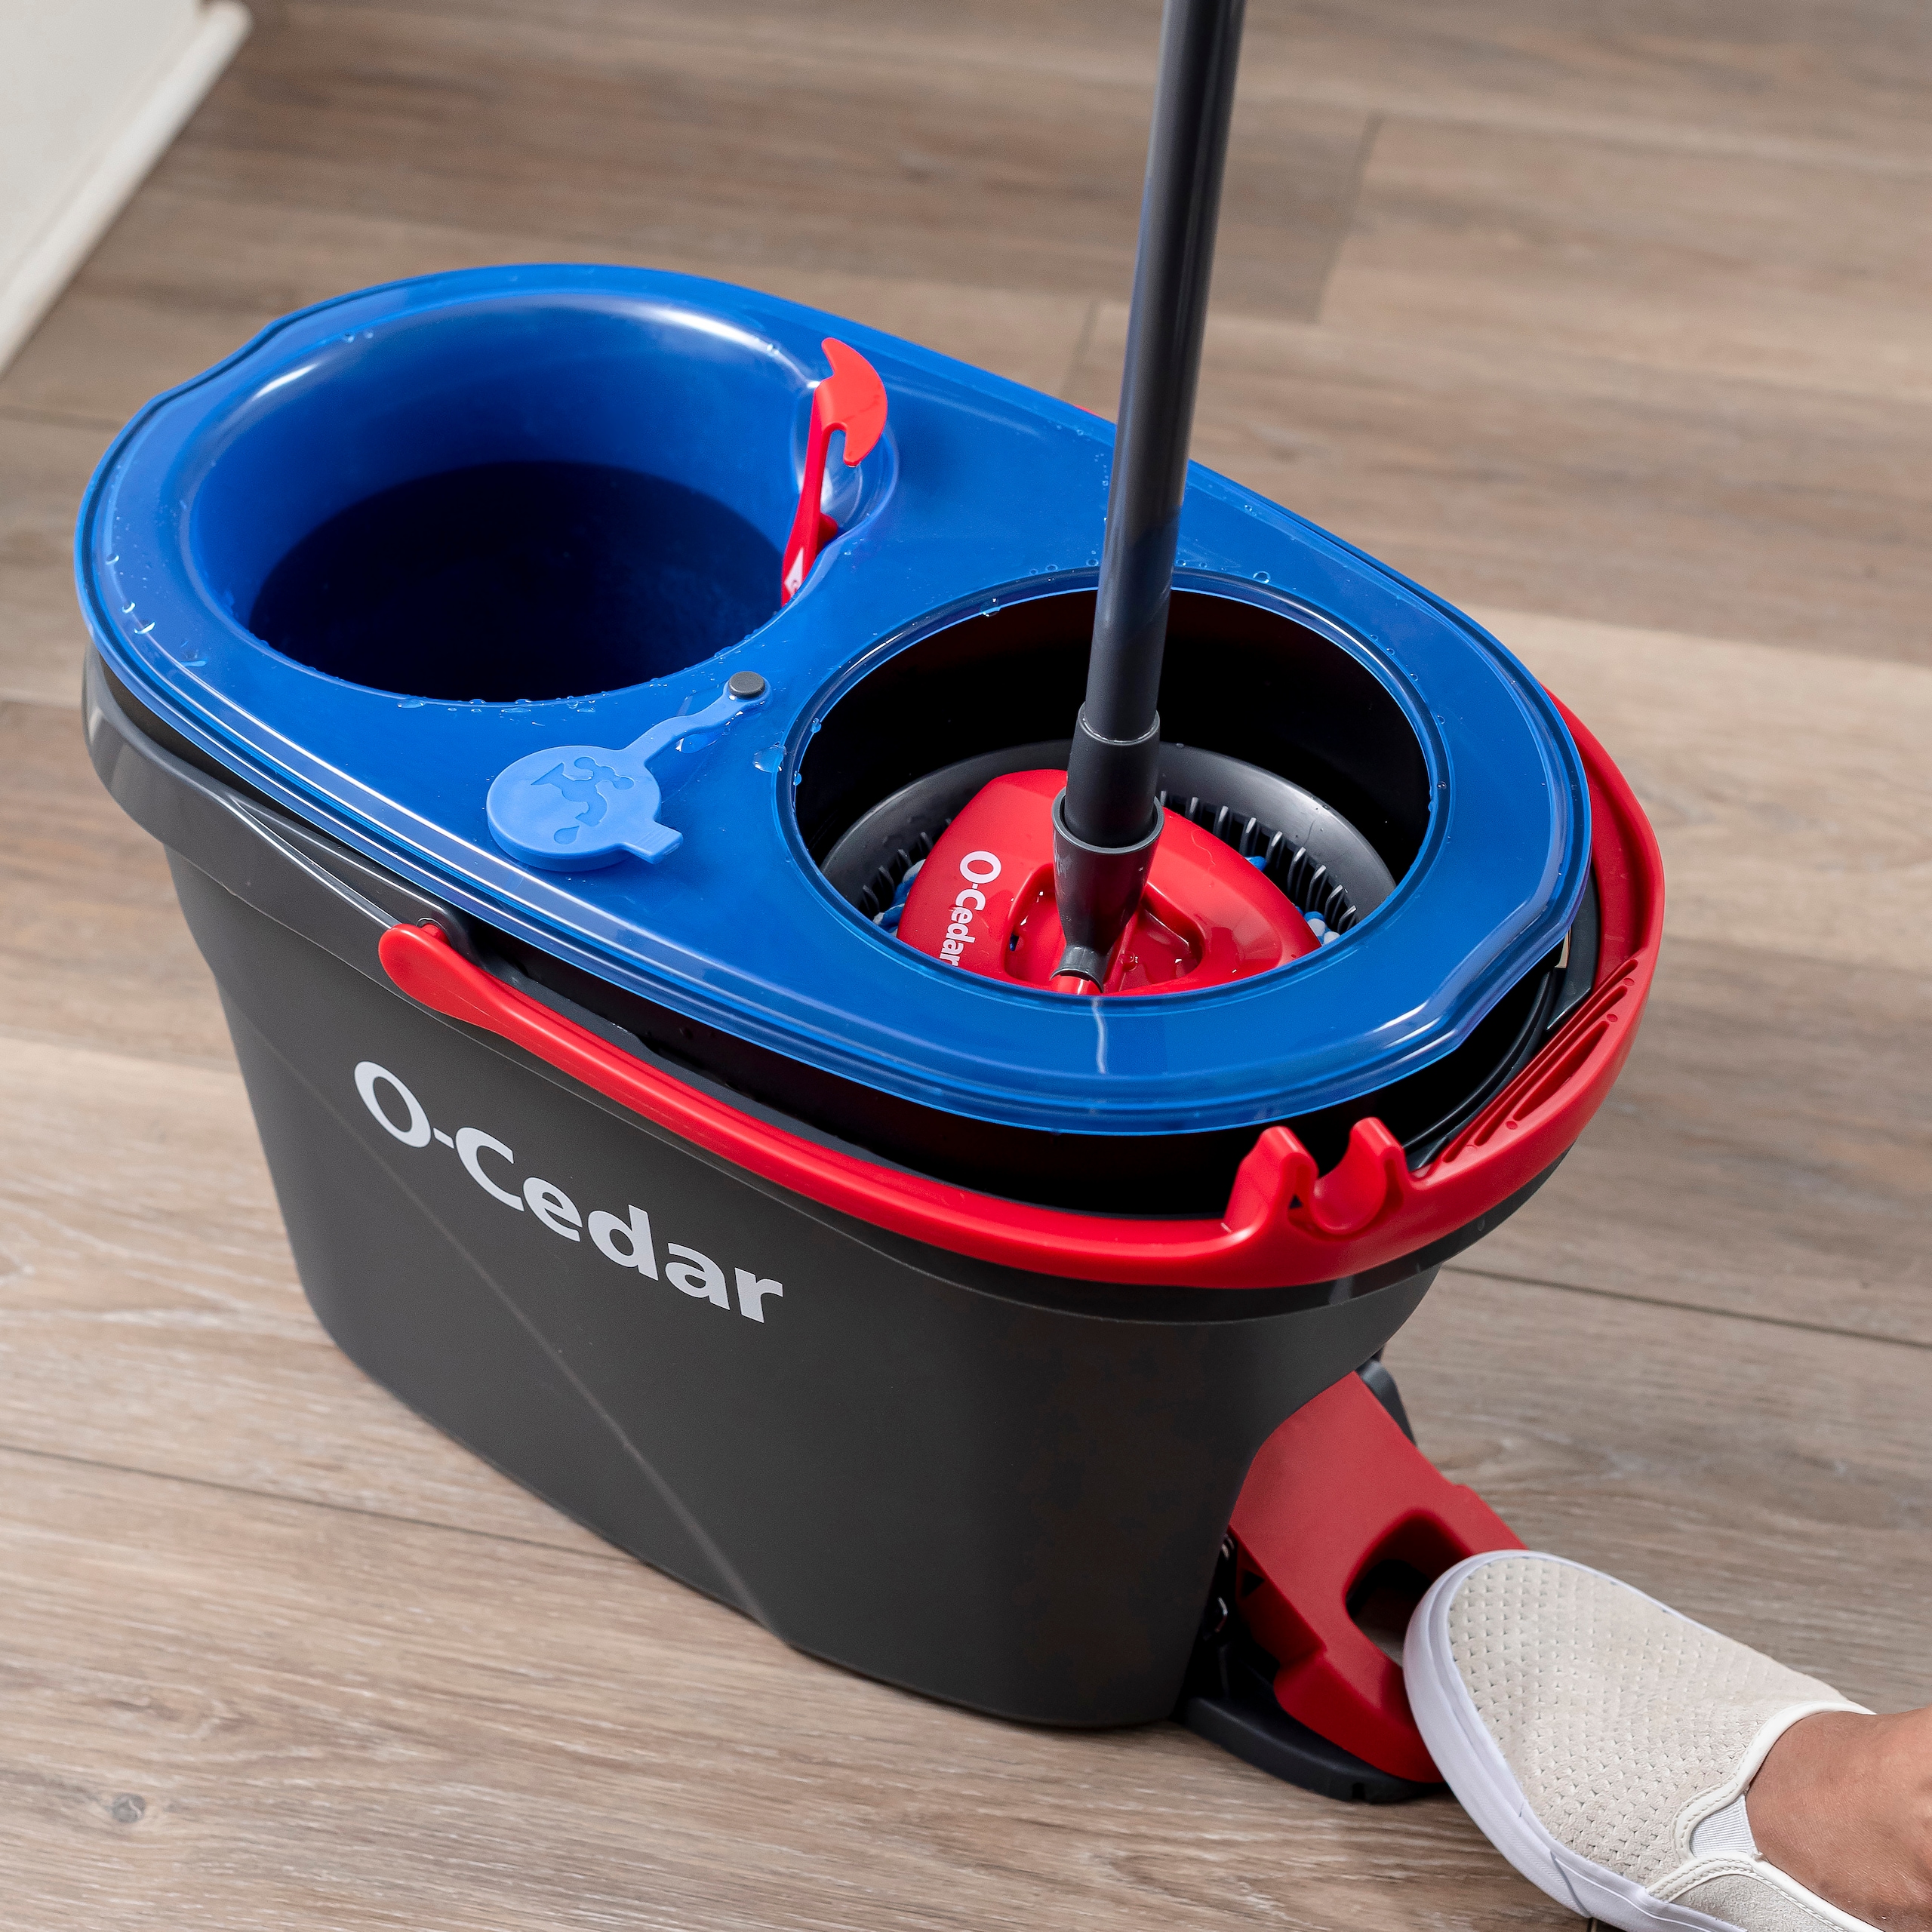 O-Cedar EasyWring RinseClean Spin Mop and Bucket System, Hands-Free System  